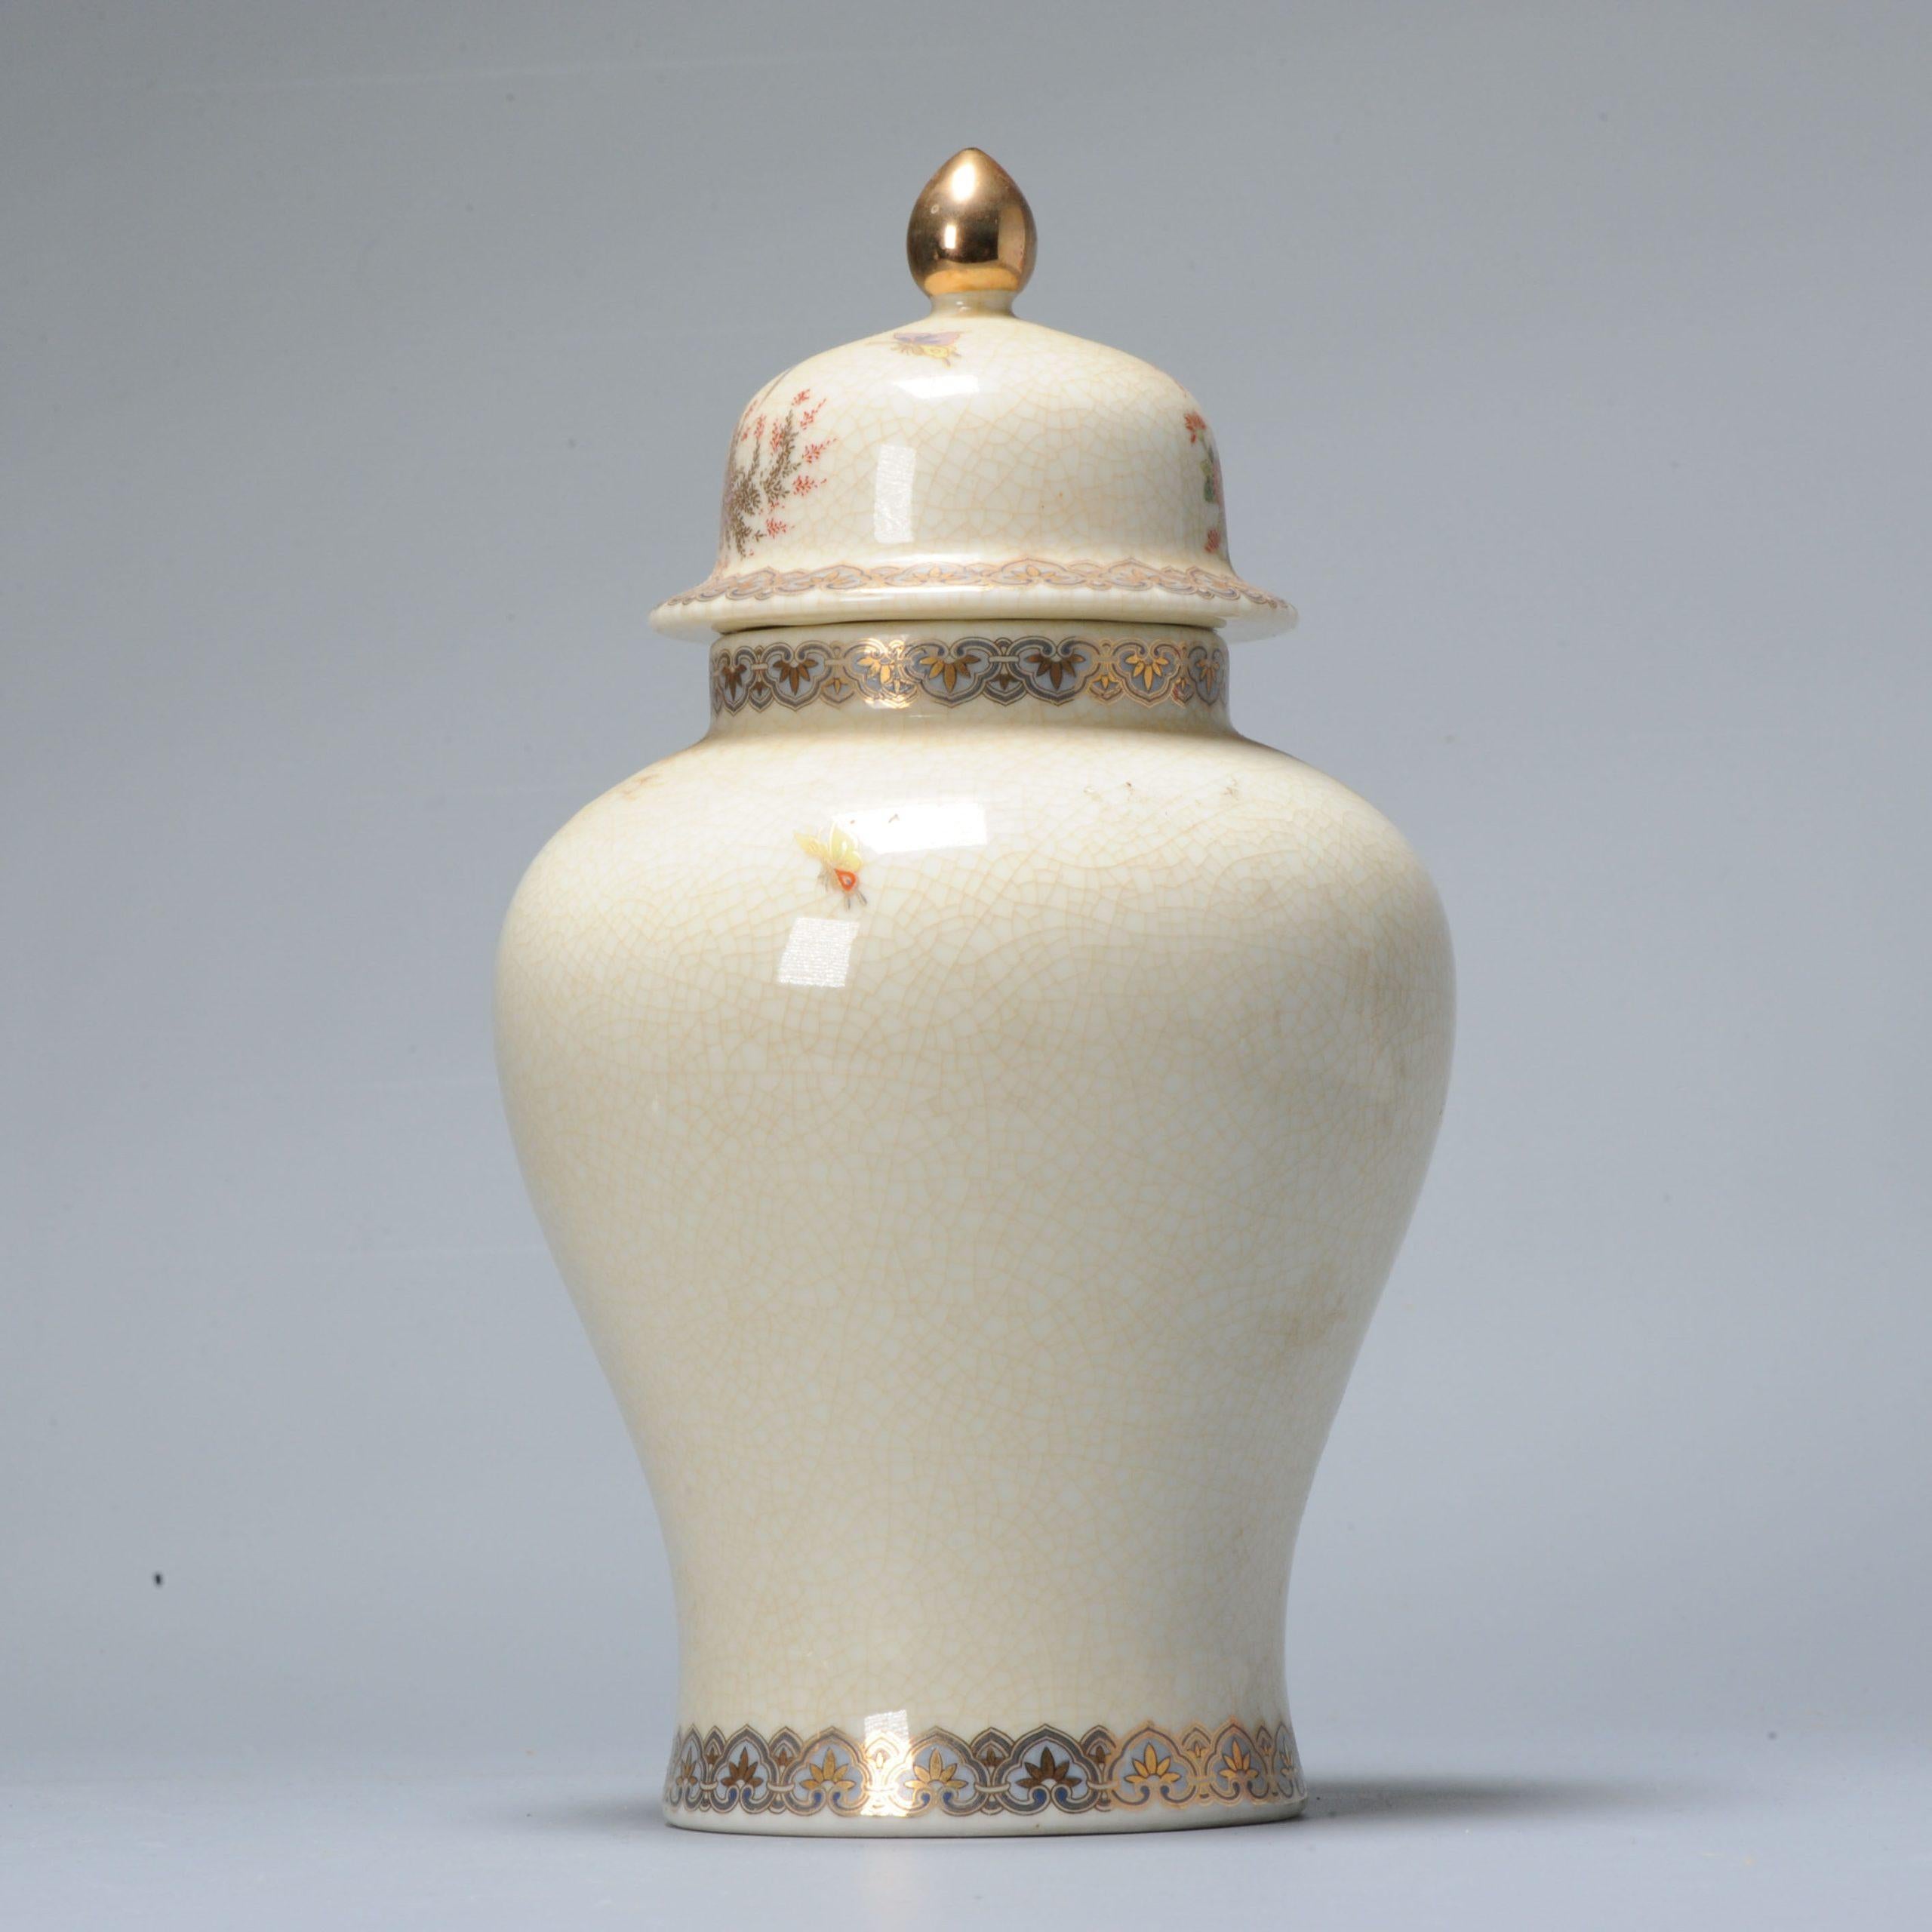 Faboulous and small japanese earthenware jar.

Mark at the base.

Second half 20th century.

Additional information:
Material: Porcelain & Pottery
Type: Vase
Japanese Style: Satsuma
Region of Origin: Japan
Period: 20th century Showa Periode